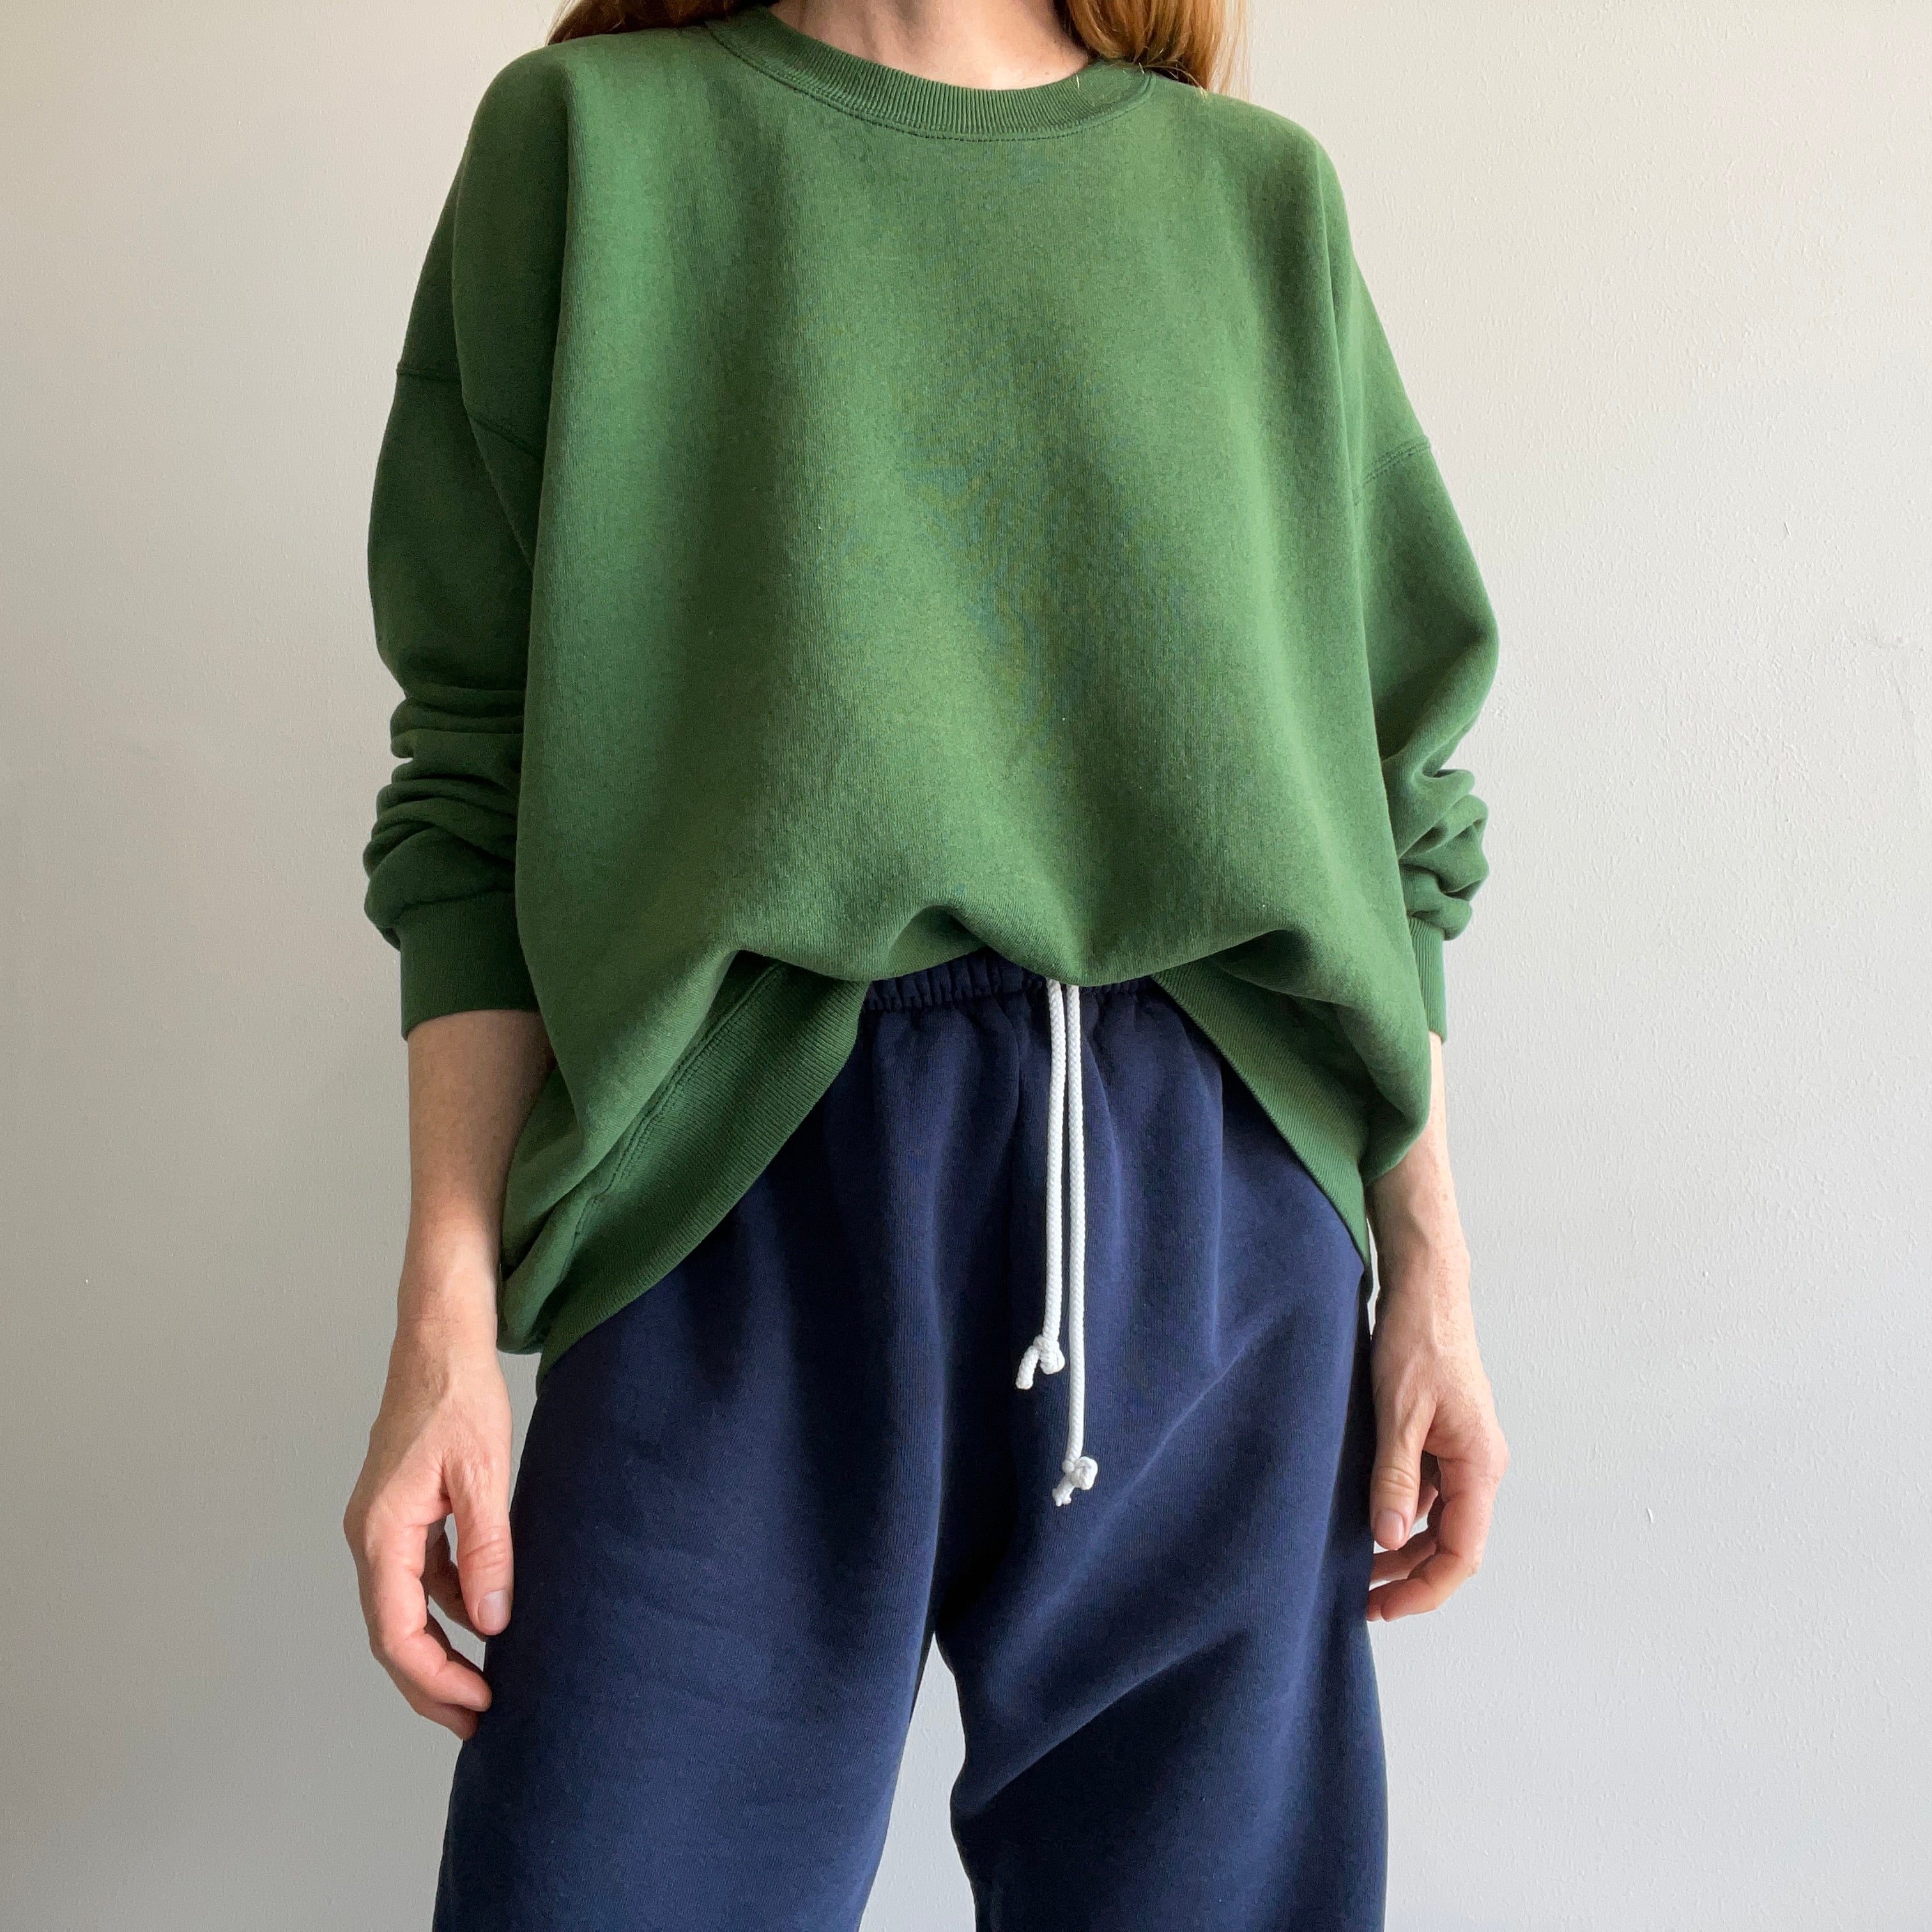 1980s Sun Faded To That Slightly Shiny Perfection Green Sweatshirt by Lee